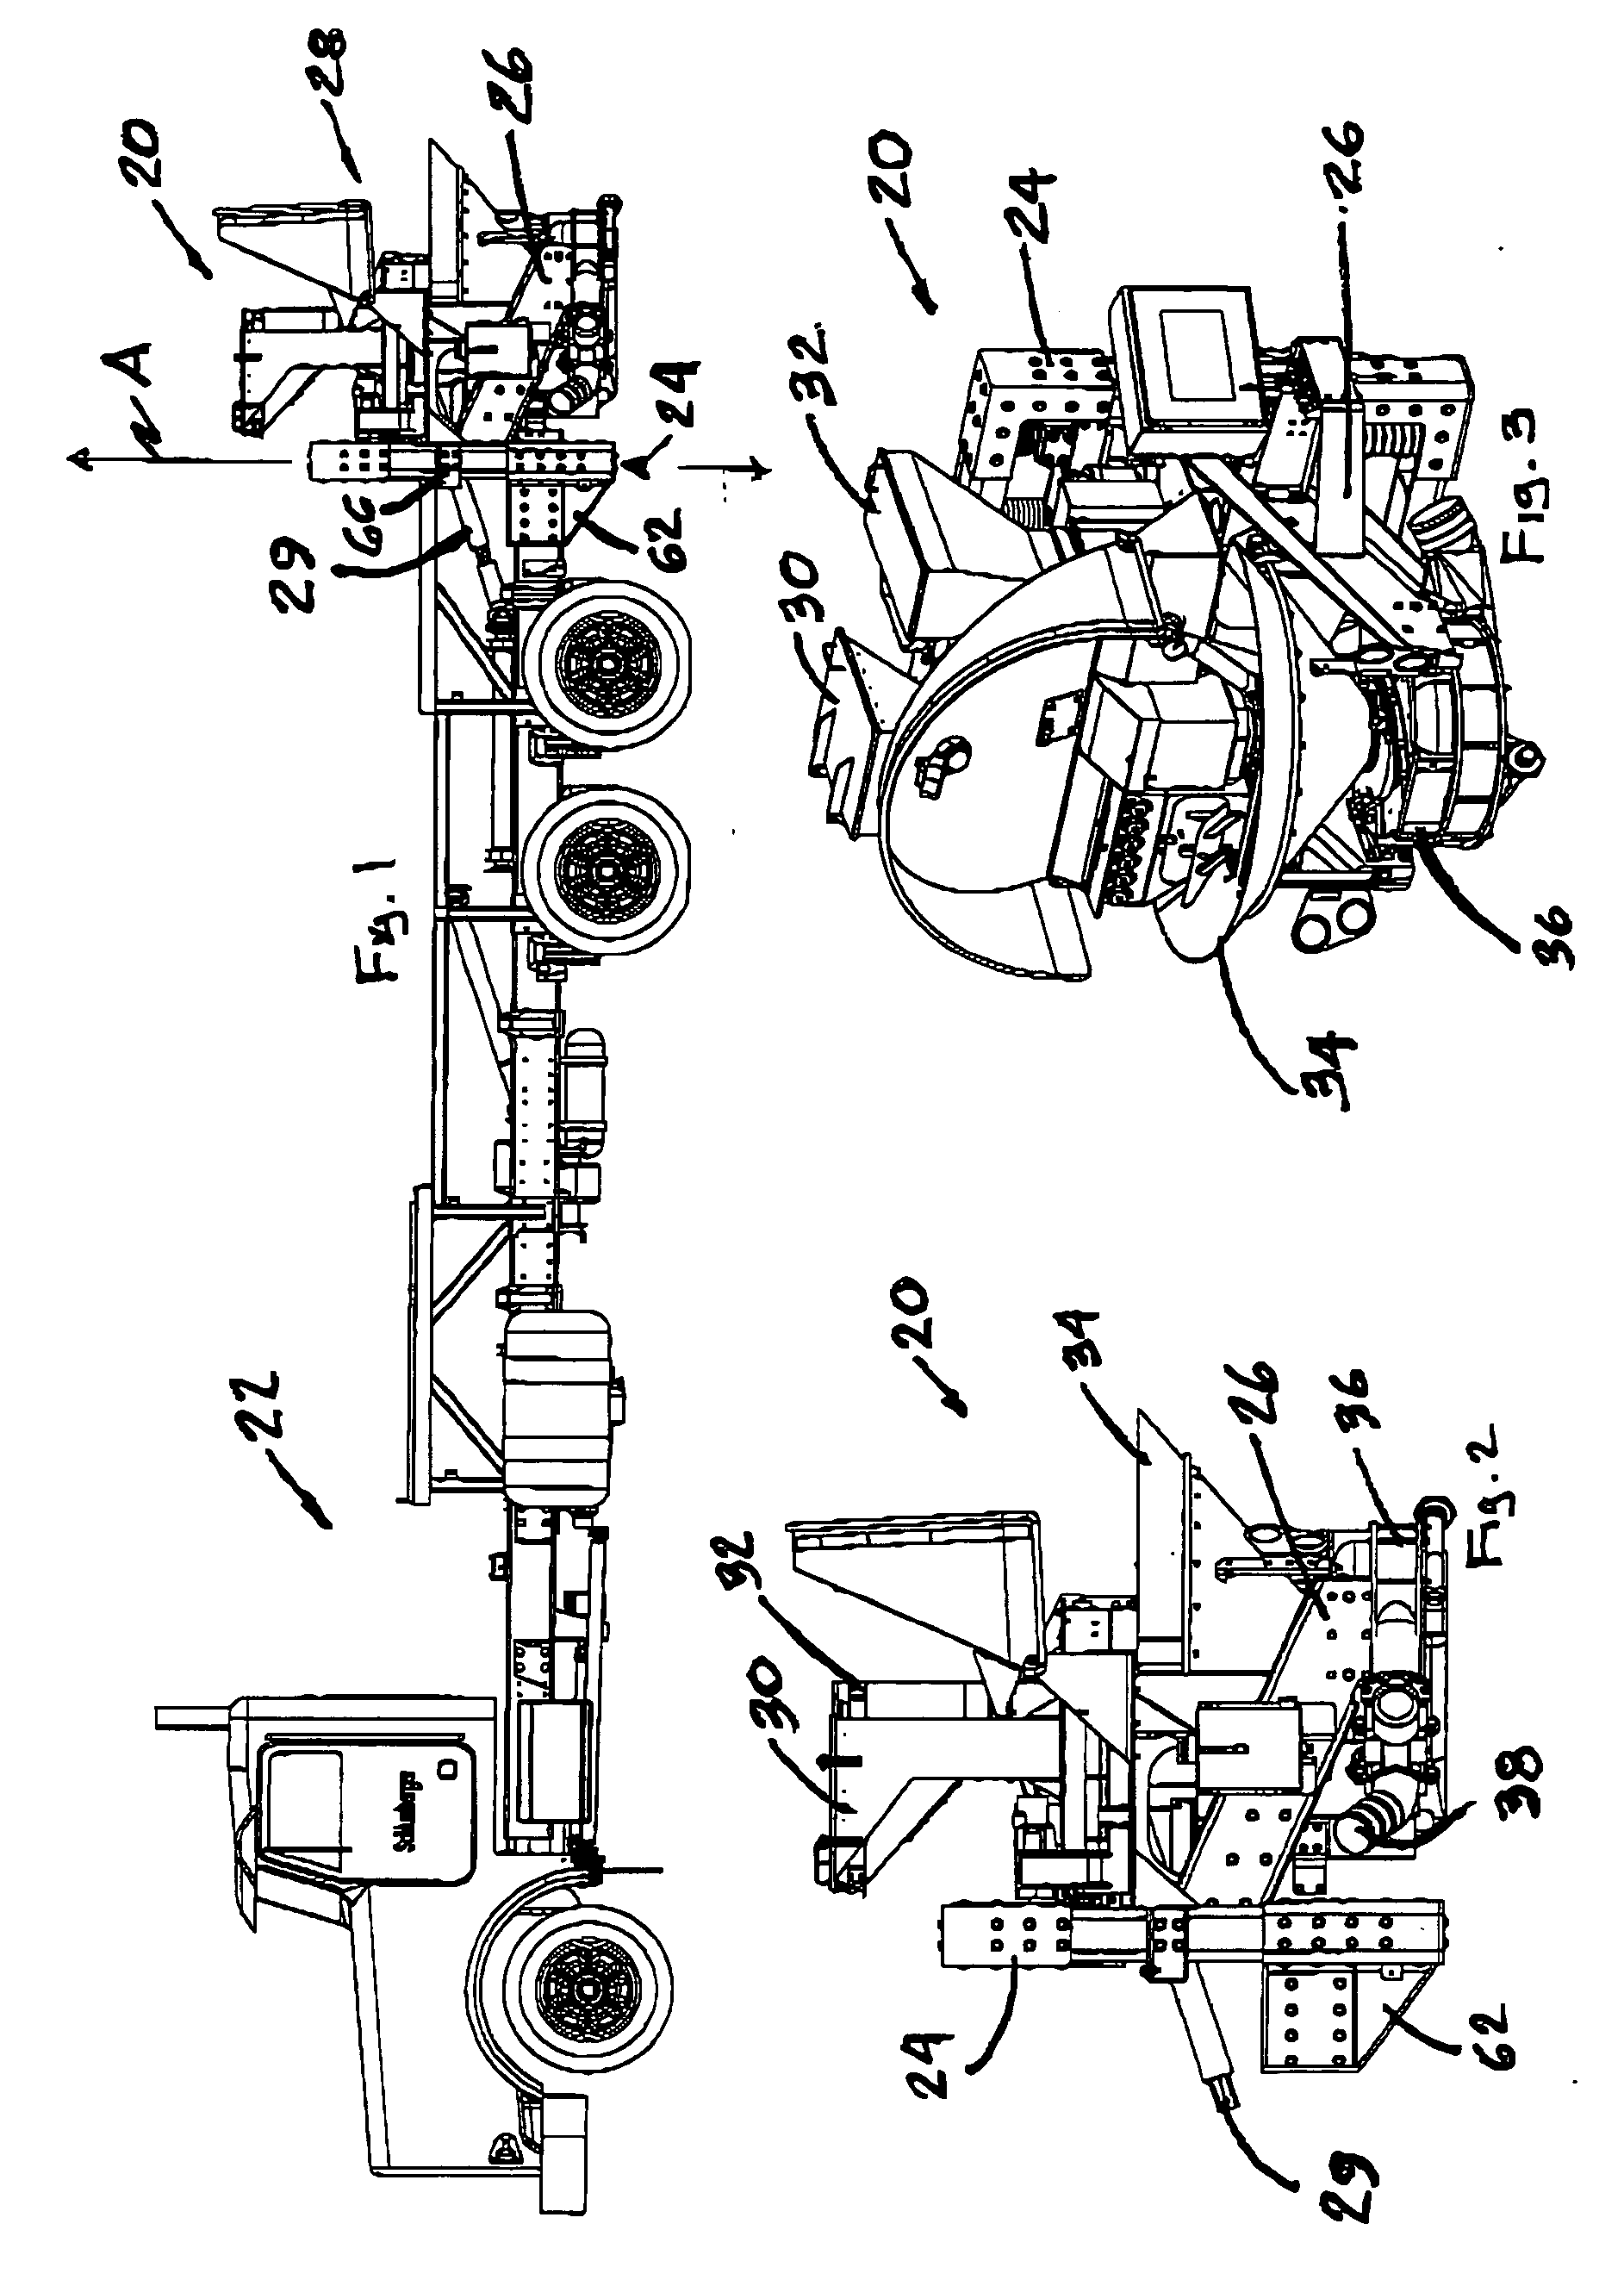 Apparatus for mounting a frac blender on a transport vehicle